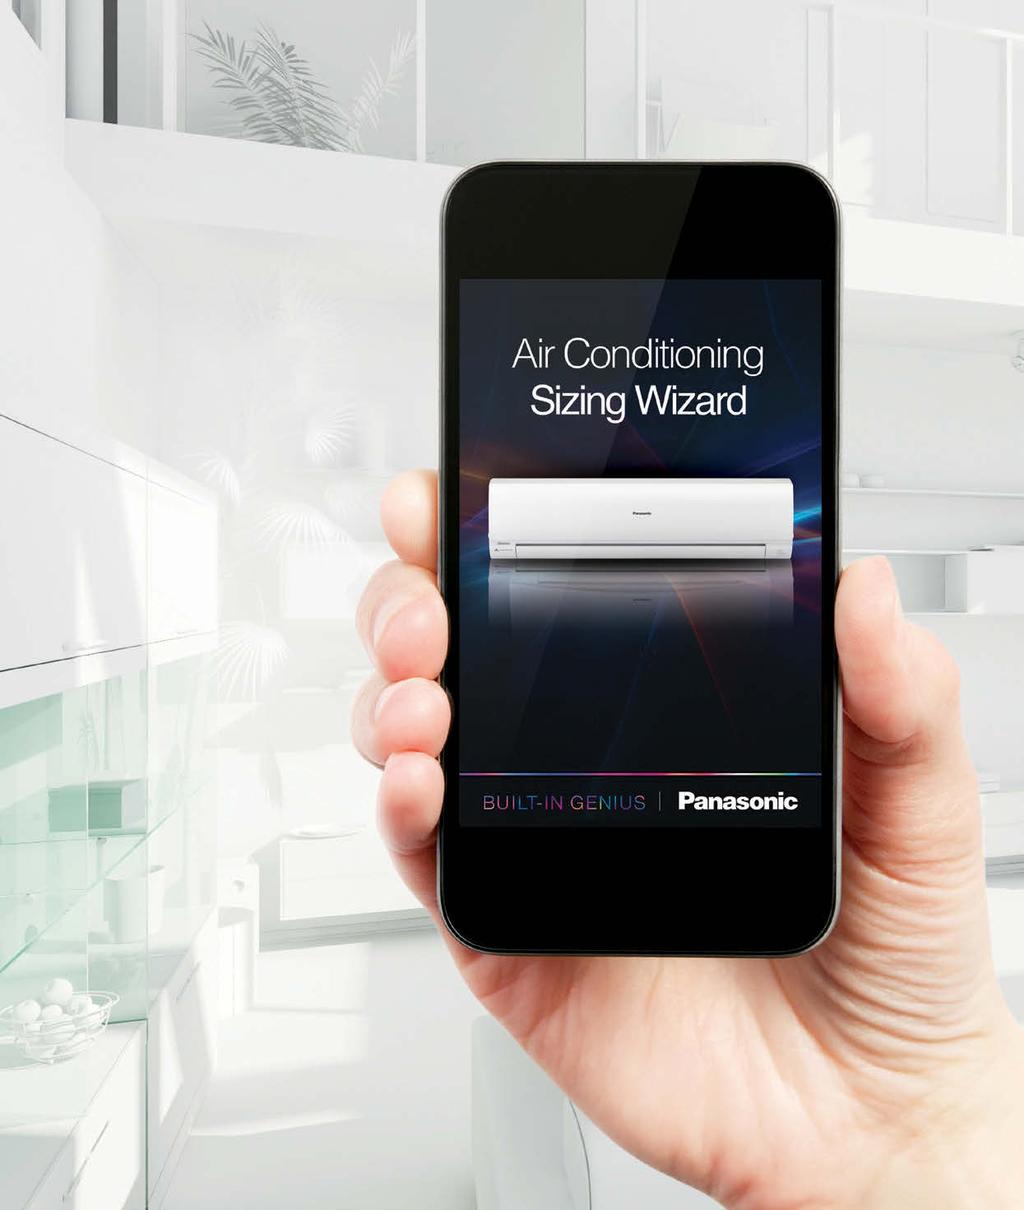 PANASONC SZNG WZARD APP The Panasonic Air Conditioning Sizing Wizard makes choosing the right air conditioner easier.